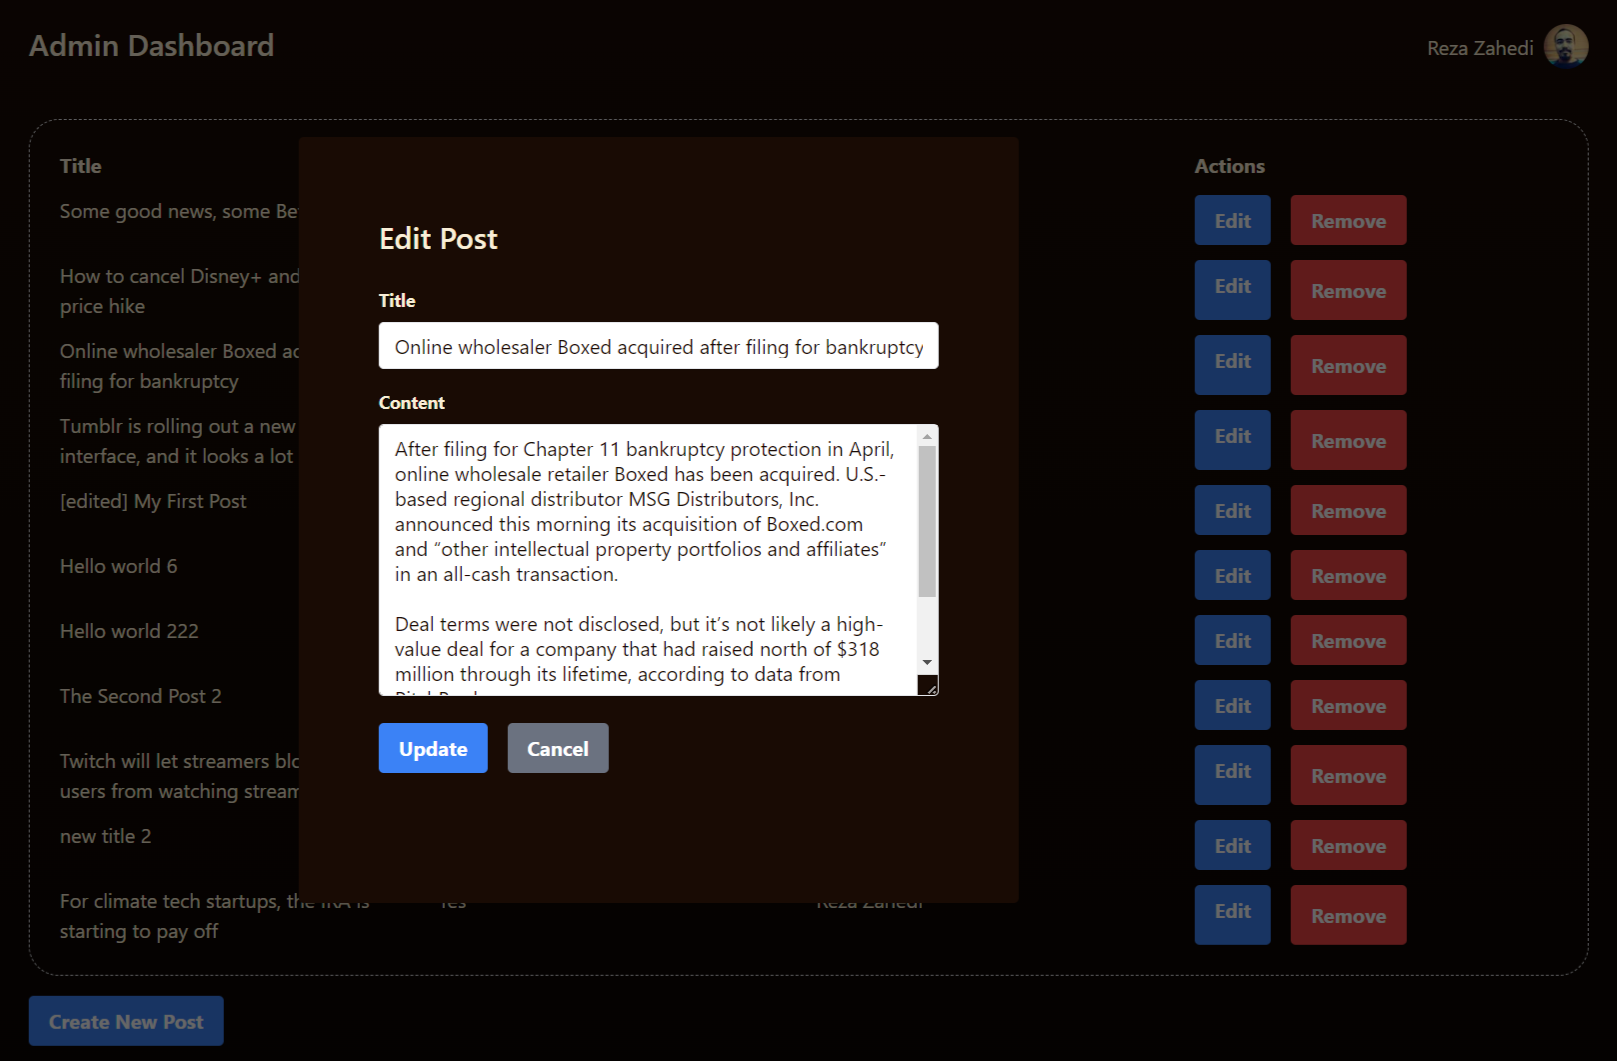 Admin CRUD section with edit page opened as a modal